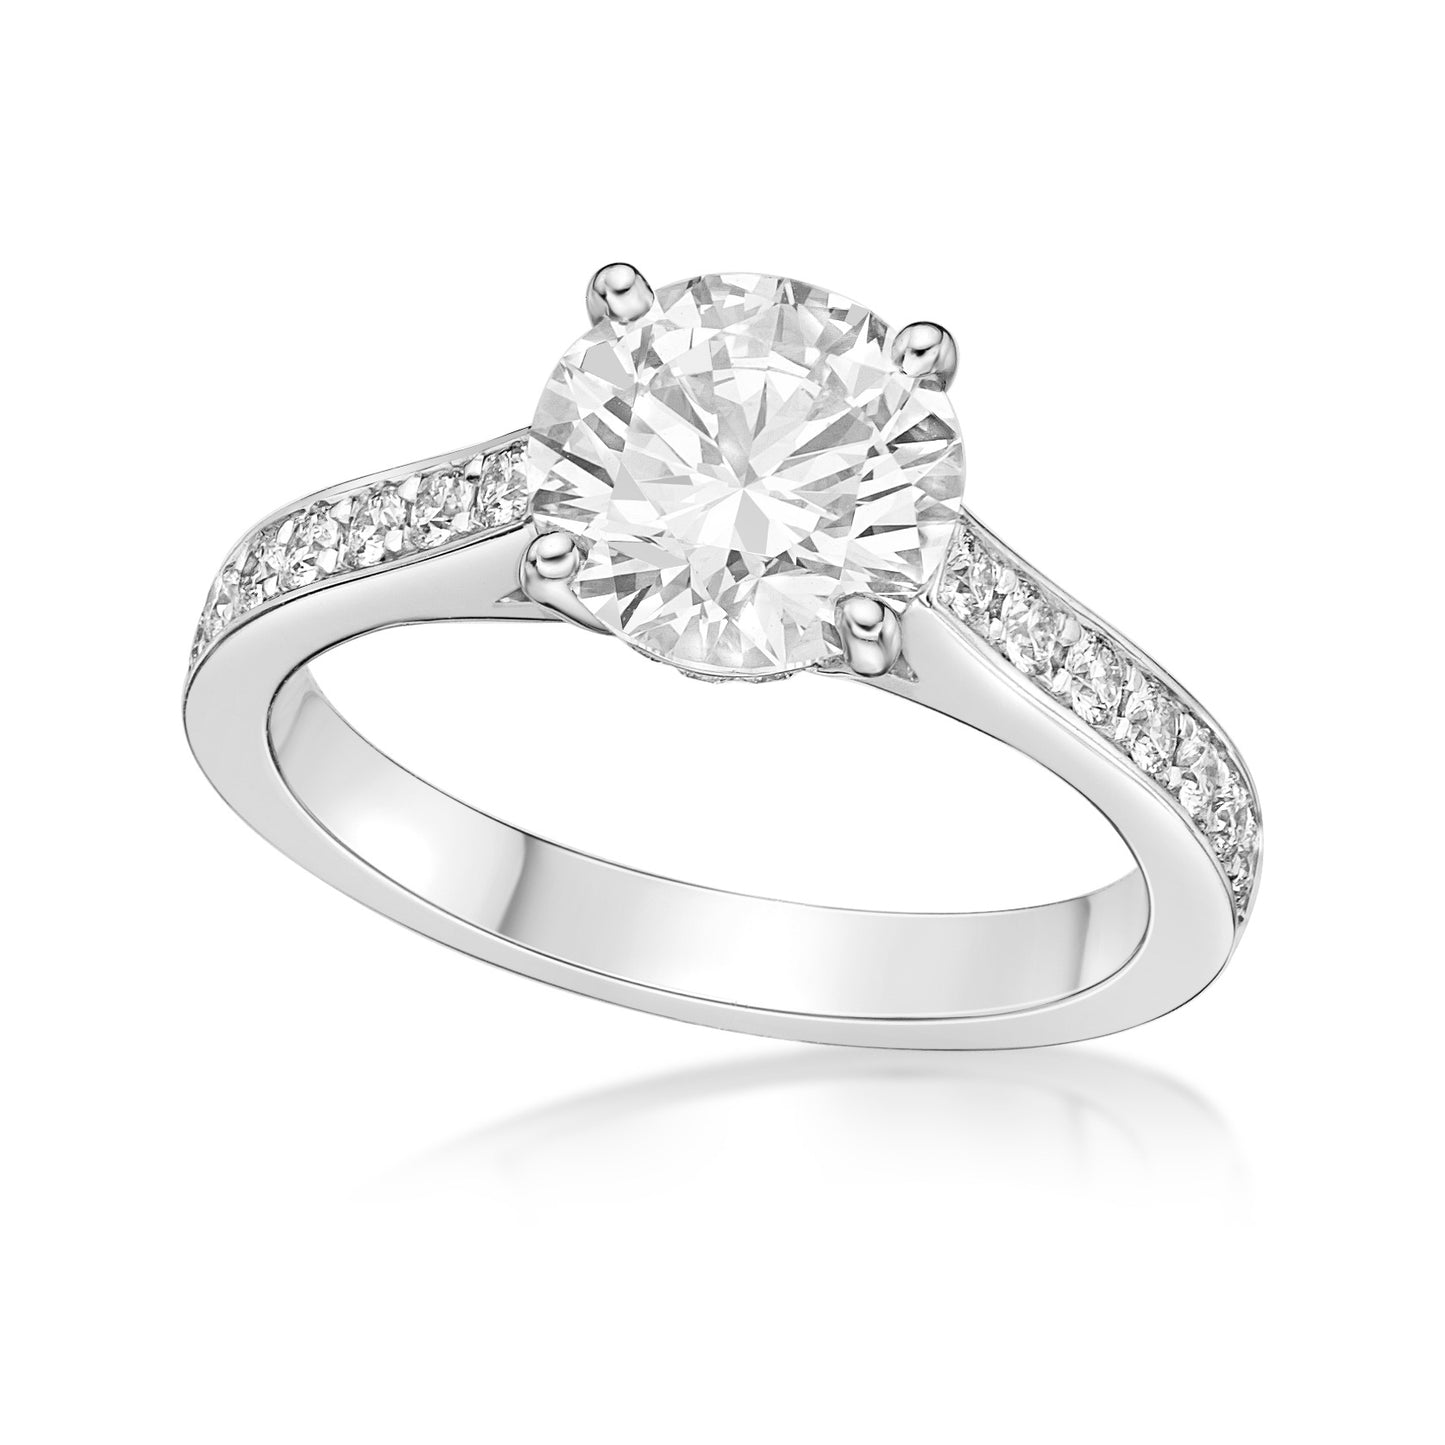 1.77ct Round Brilliant diamond in 18k White Gold engagement ring setting with hidden halo and Diamond Eternity Band